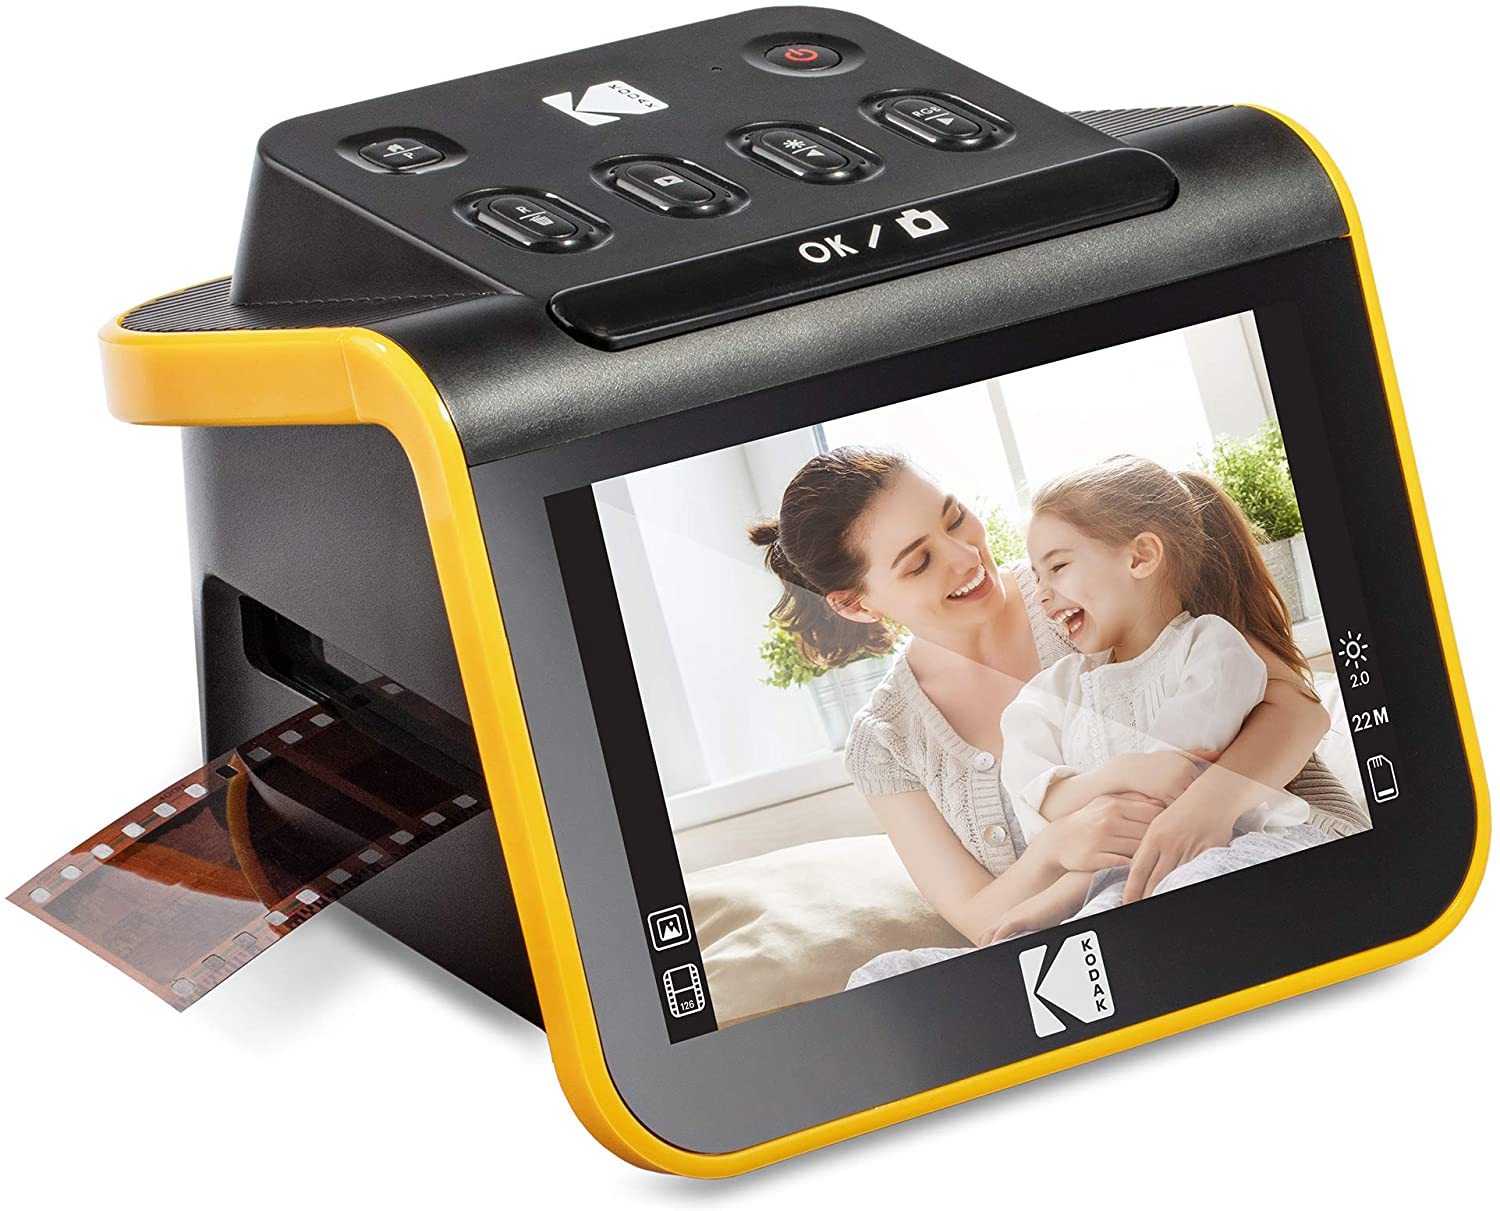 Primary image for Kodak Slide N Scan Film And Slide Scanner With Large 5” Lcd Screen, Convert